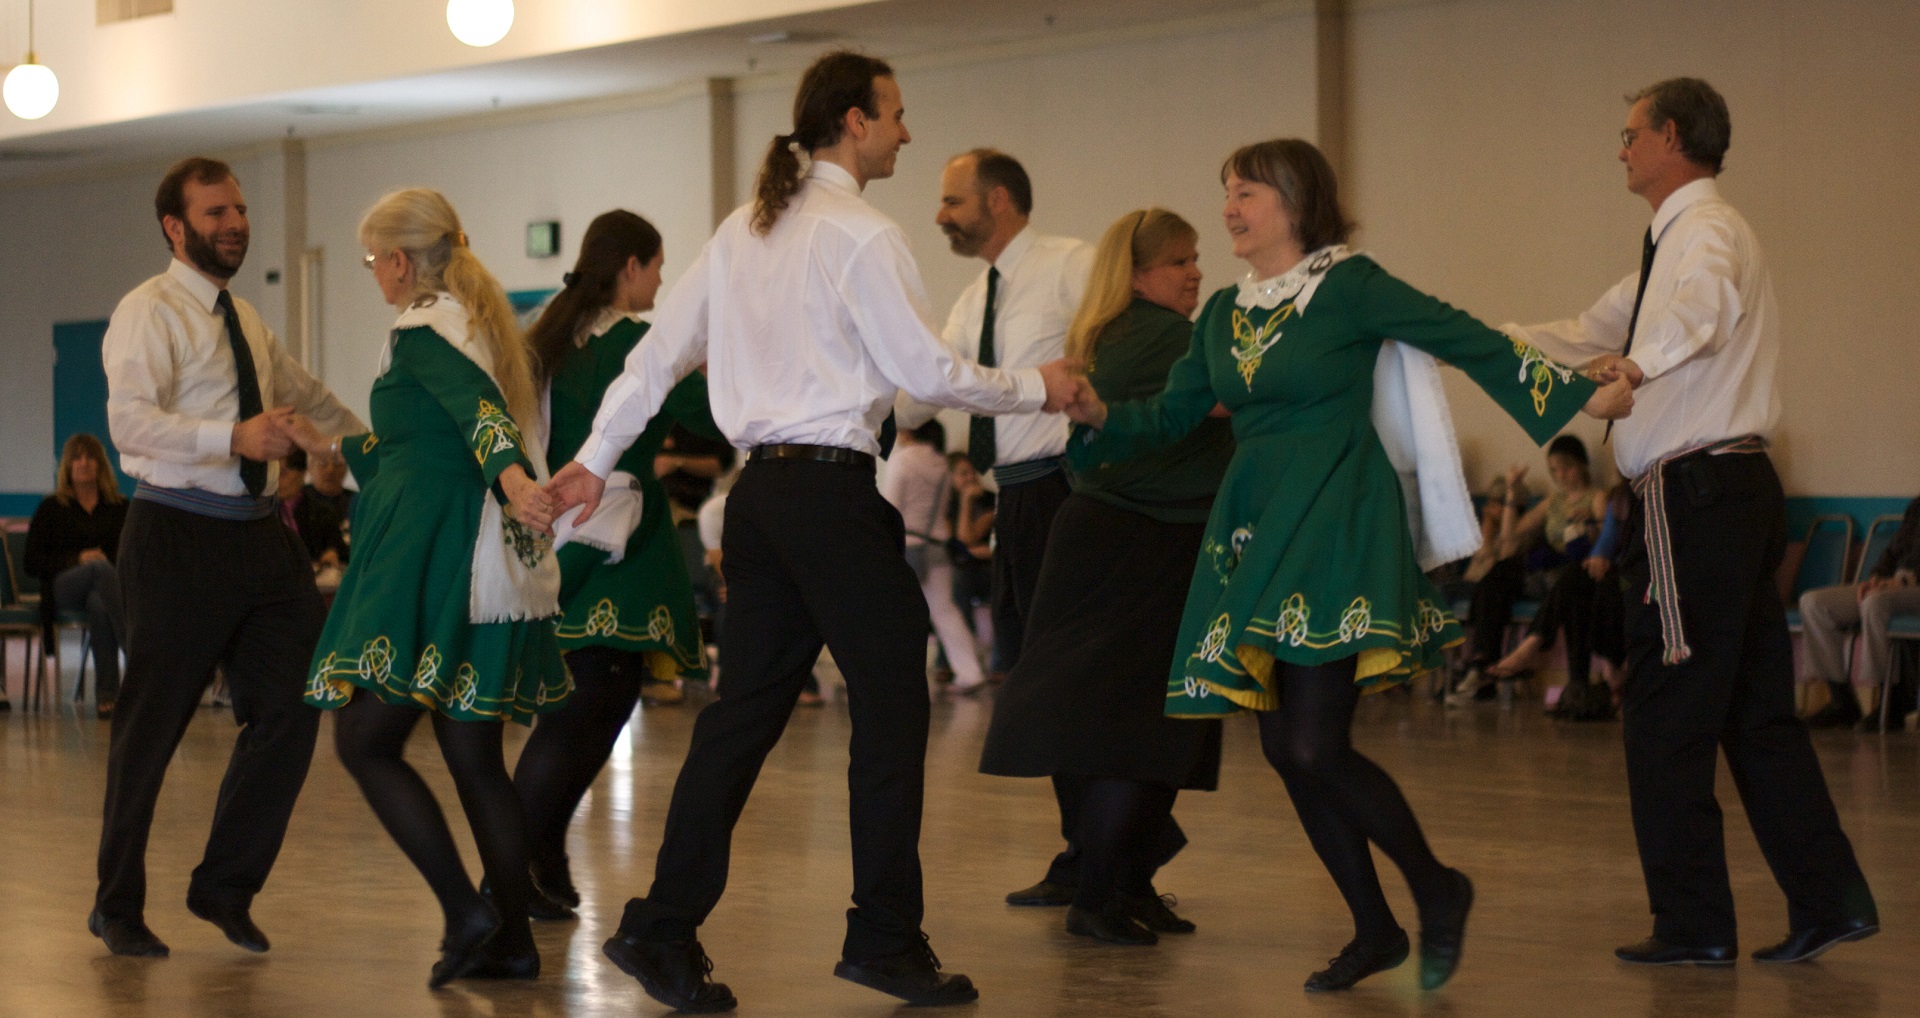 A group of performers wearing black, white, and green attire are dancing in a group while holding hands.